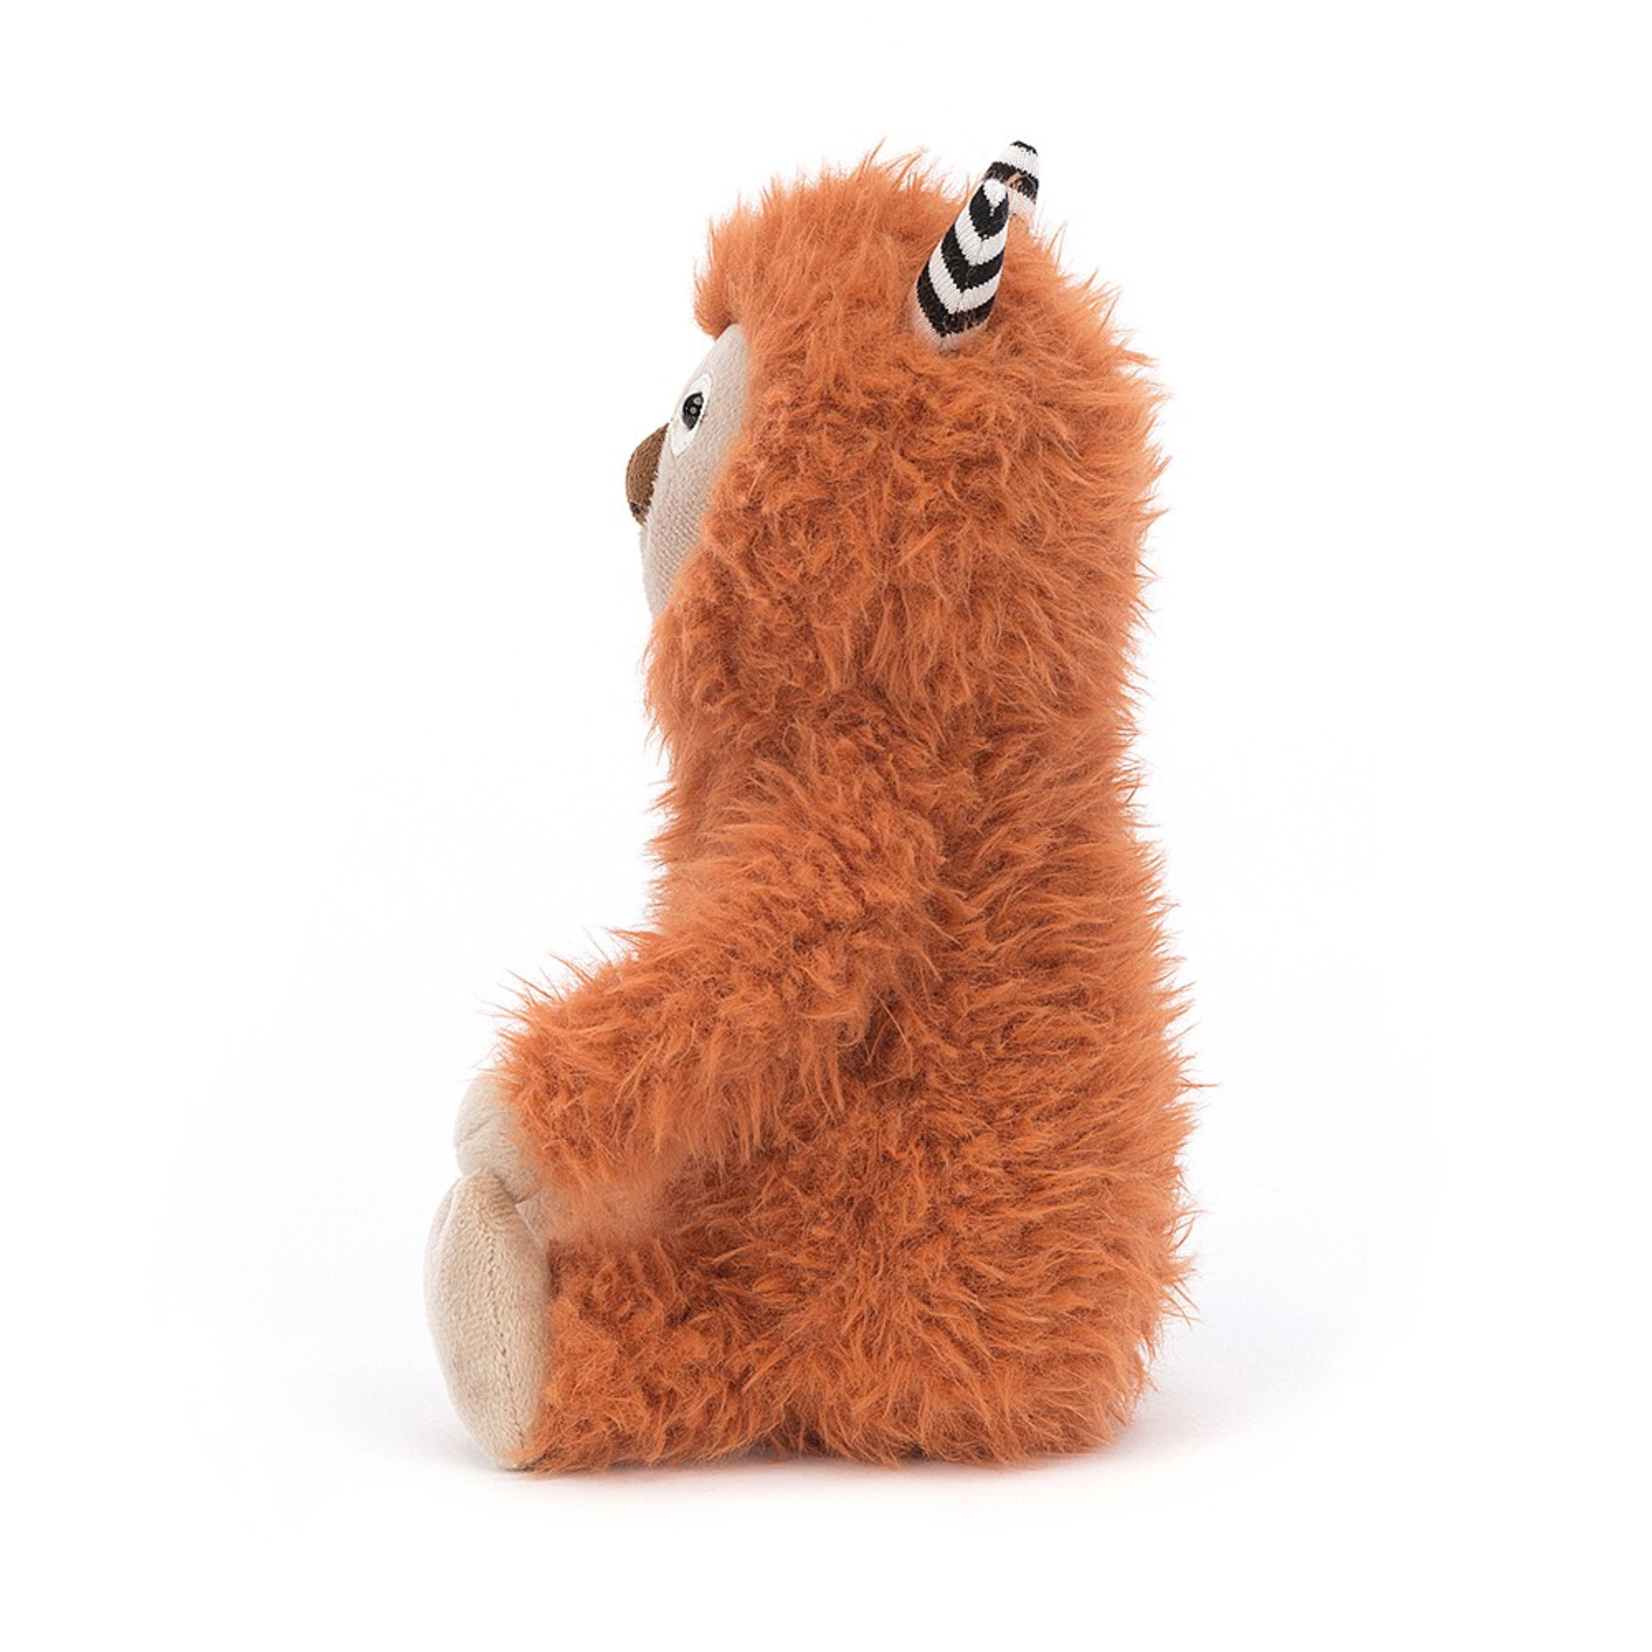 Jellycat - Colourful & Quirky Jellycat - Pip Monster Small